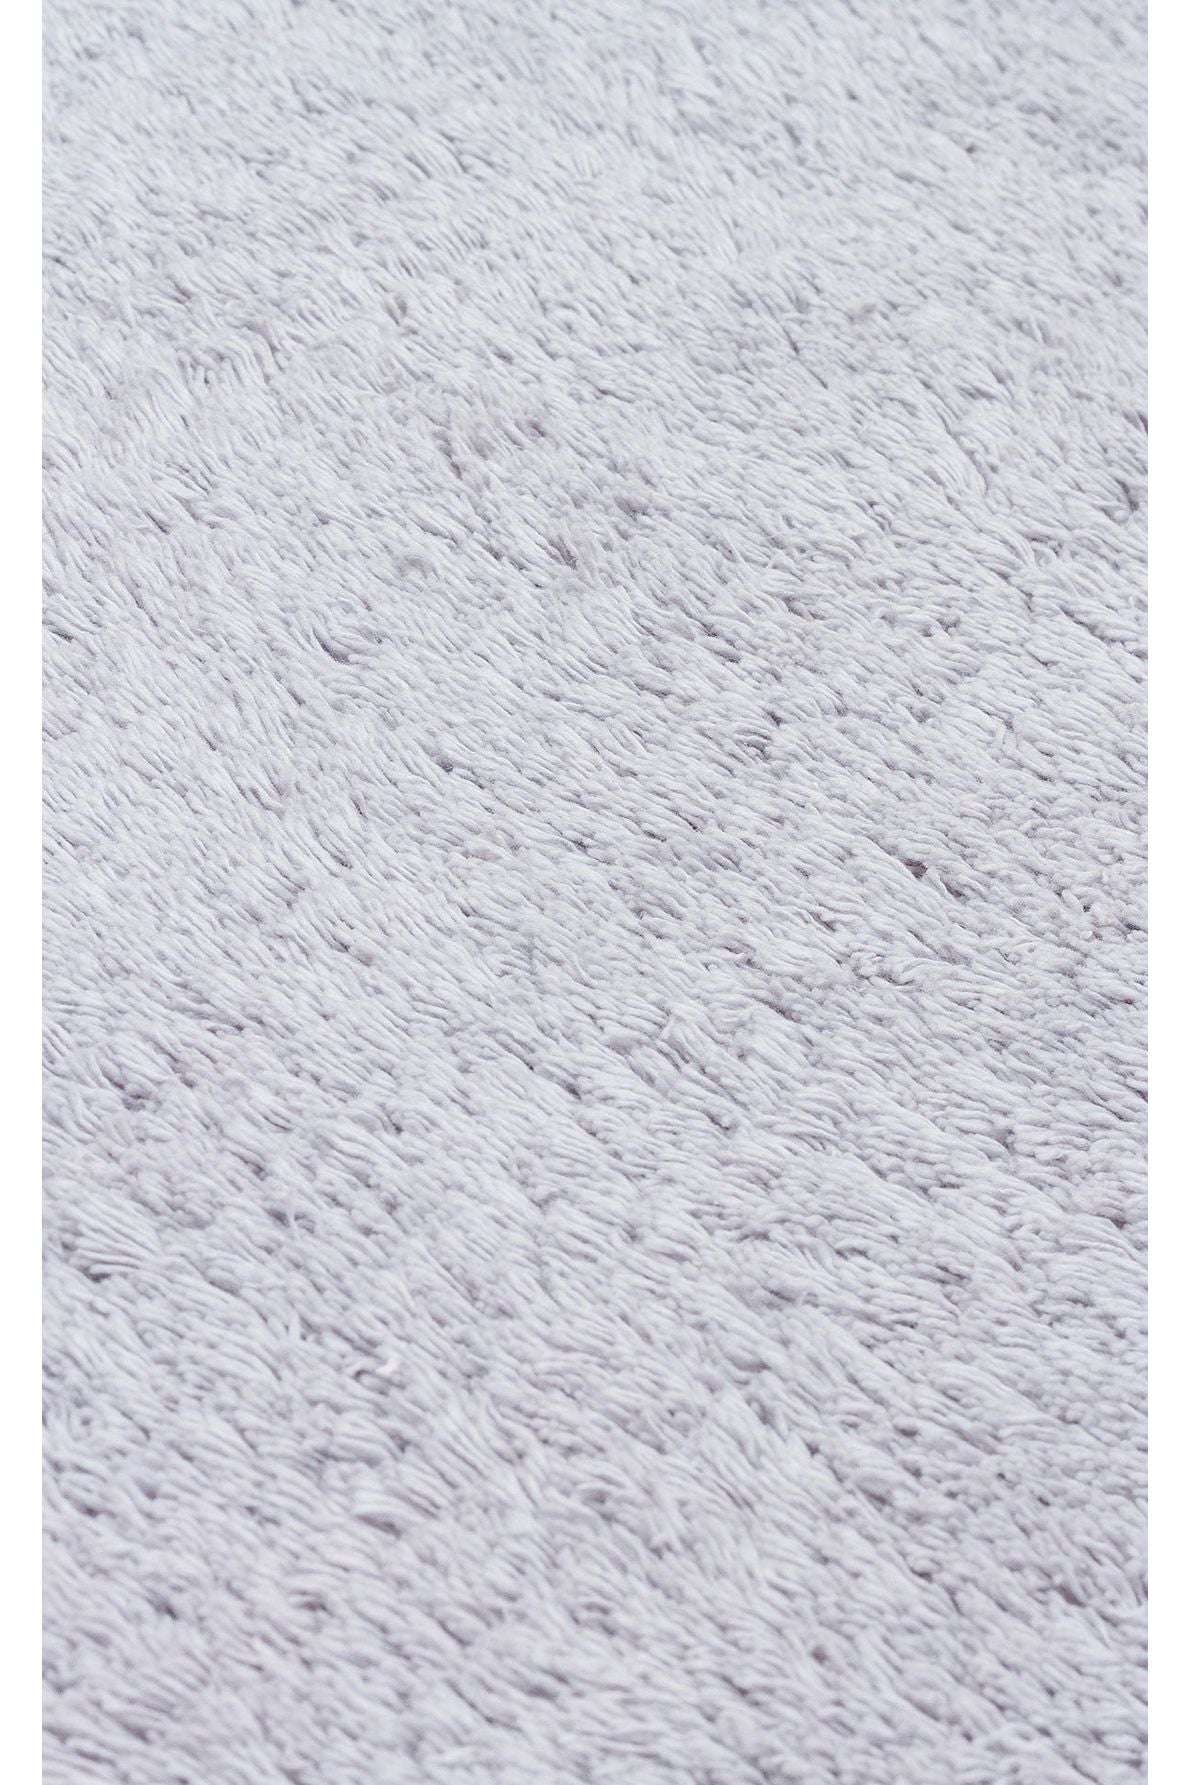 #Turkish_Carpets_Rugs# #Modern_Carpets# #Abrash_Carpets#Washable, Non-Slippary, Natural Baby Rugs With CottonCbn Plain Grey Q